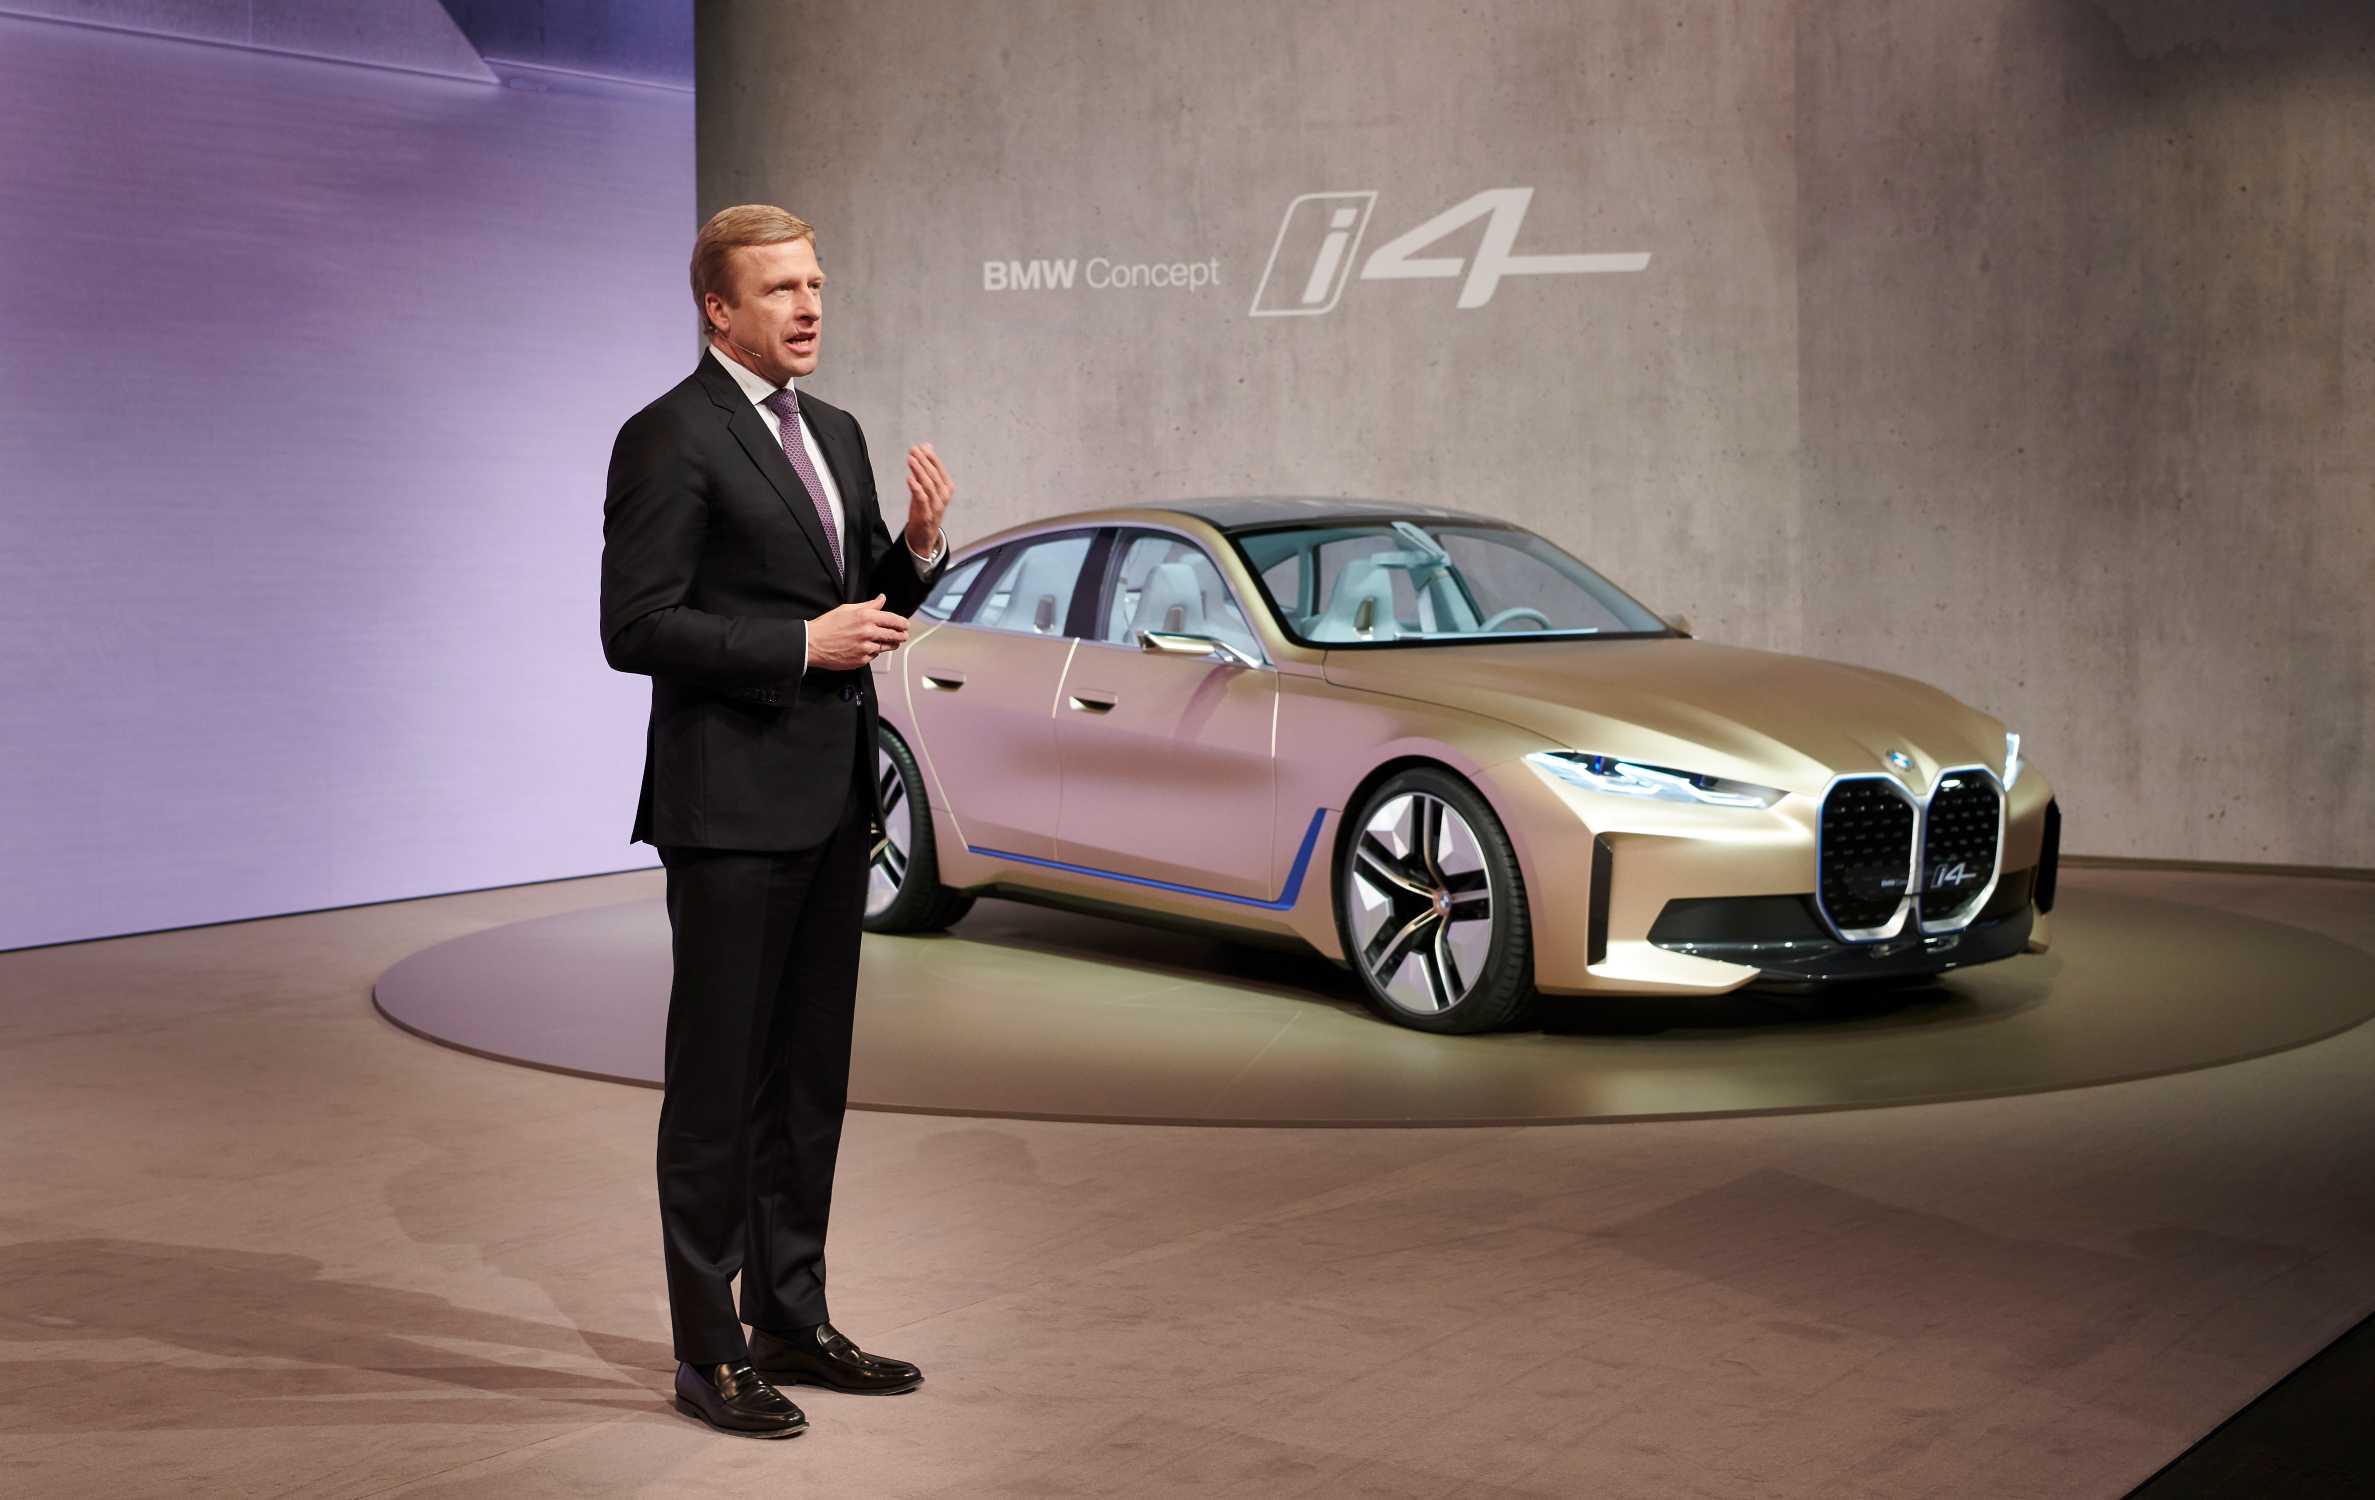 Innovation Leadership Bmw Group Plans Over 30 Billion Euros On Future Oriented Technologies Up To 25